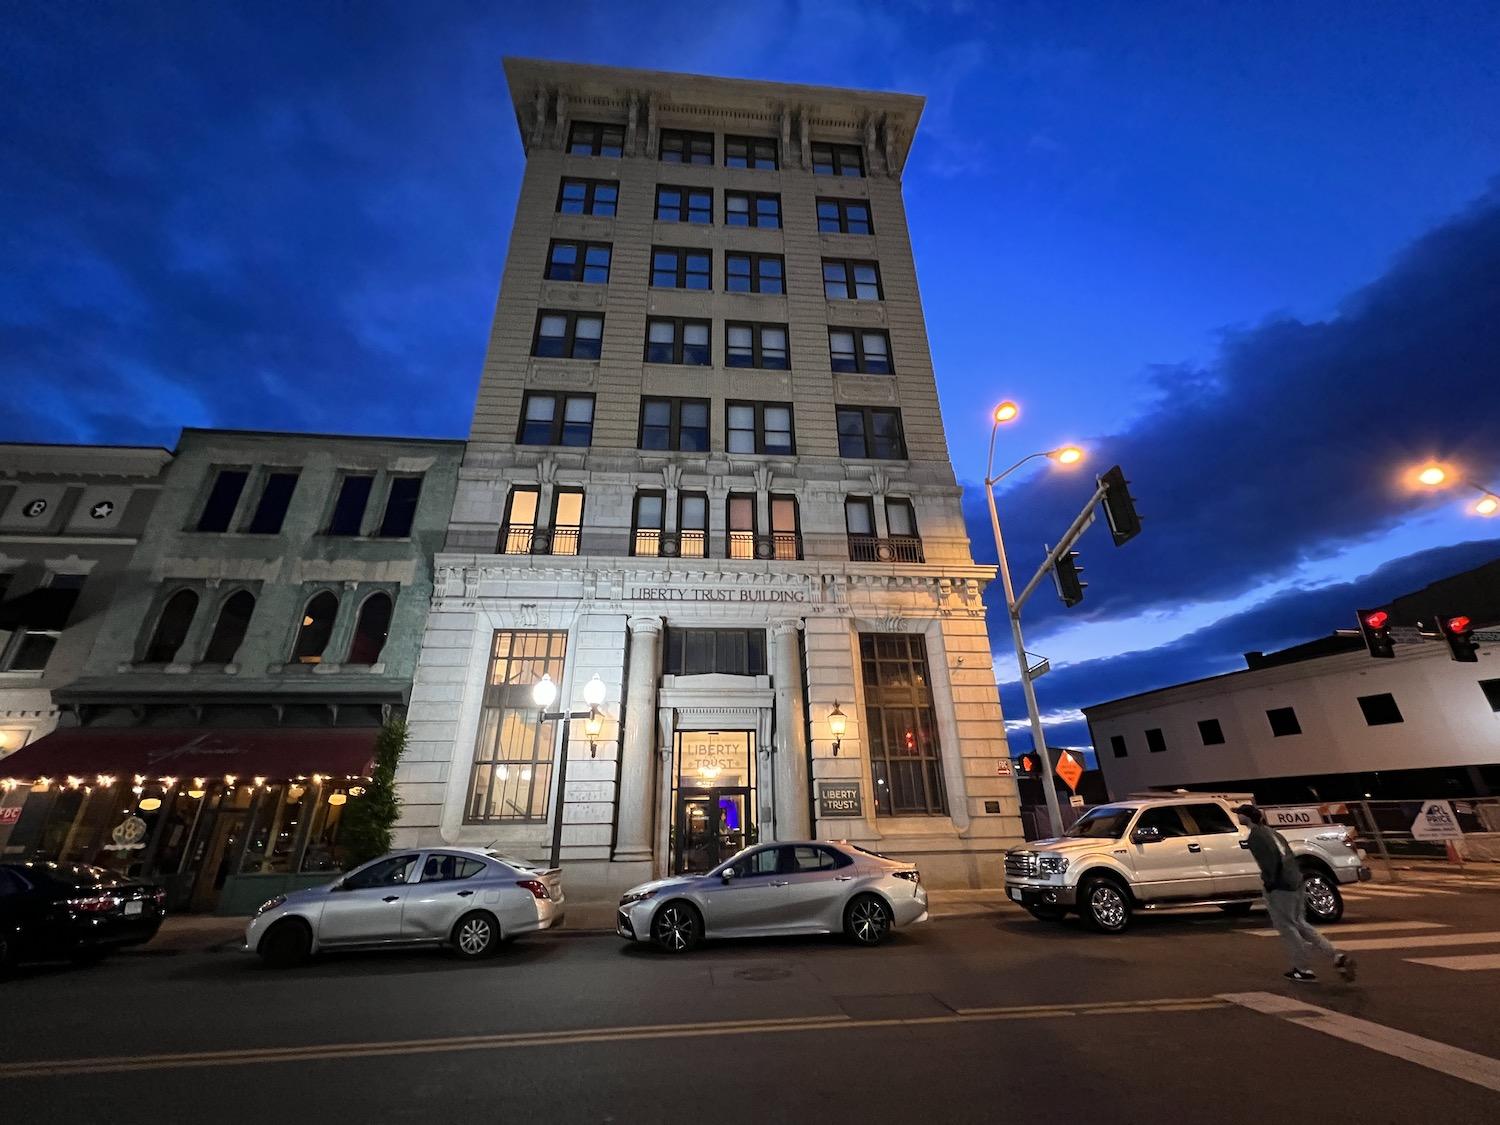 The Liberty Trust hotel in Roanoke started life as a bank and is on the National Register of Historic Places.